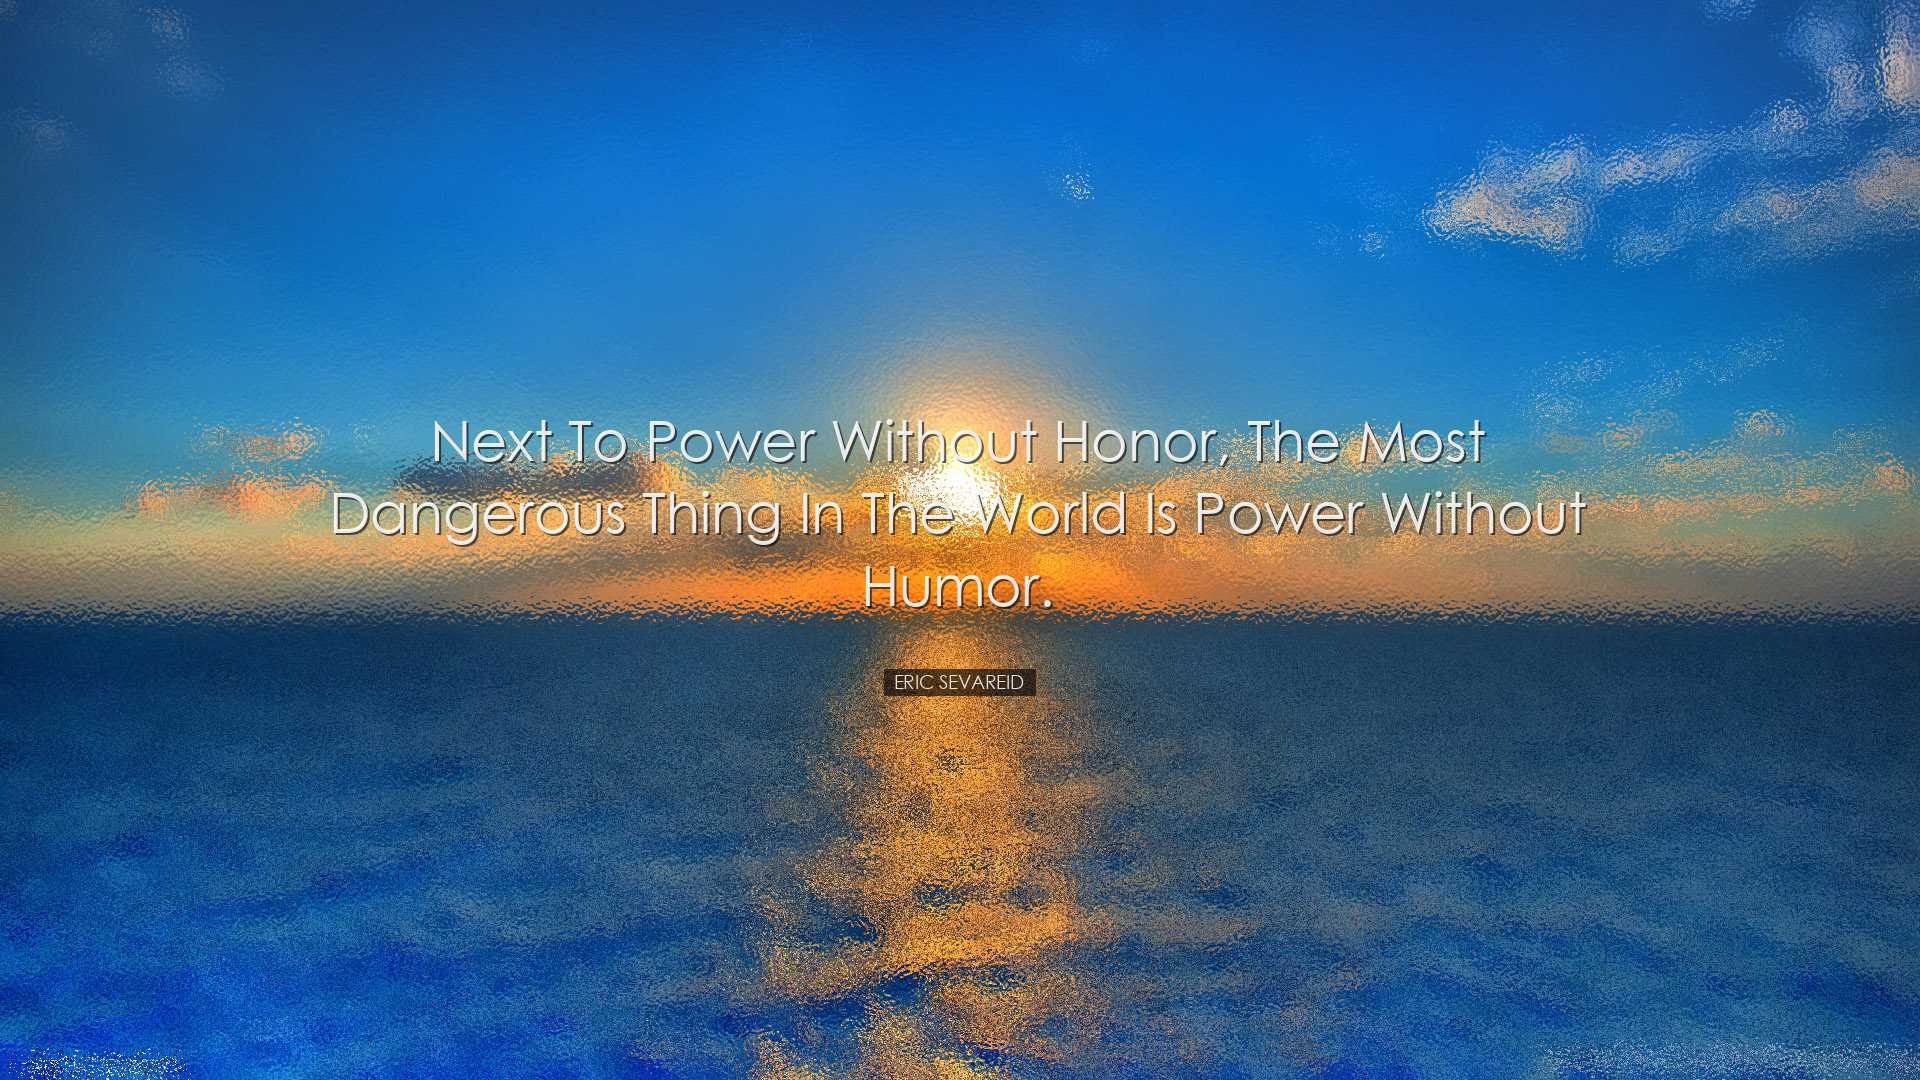 Next to power without honor, the most dangerous thing in the world